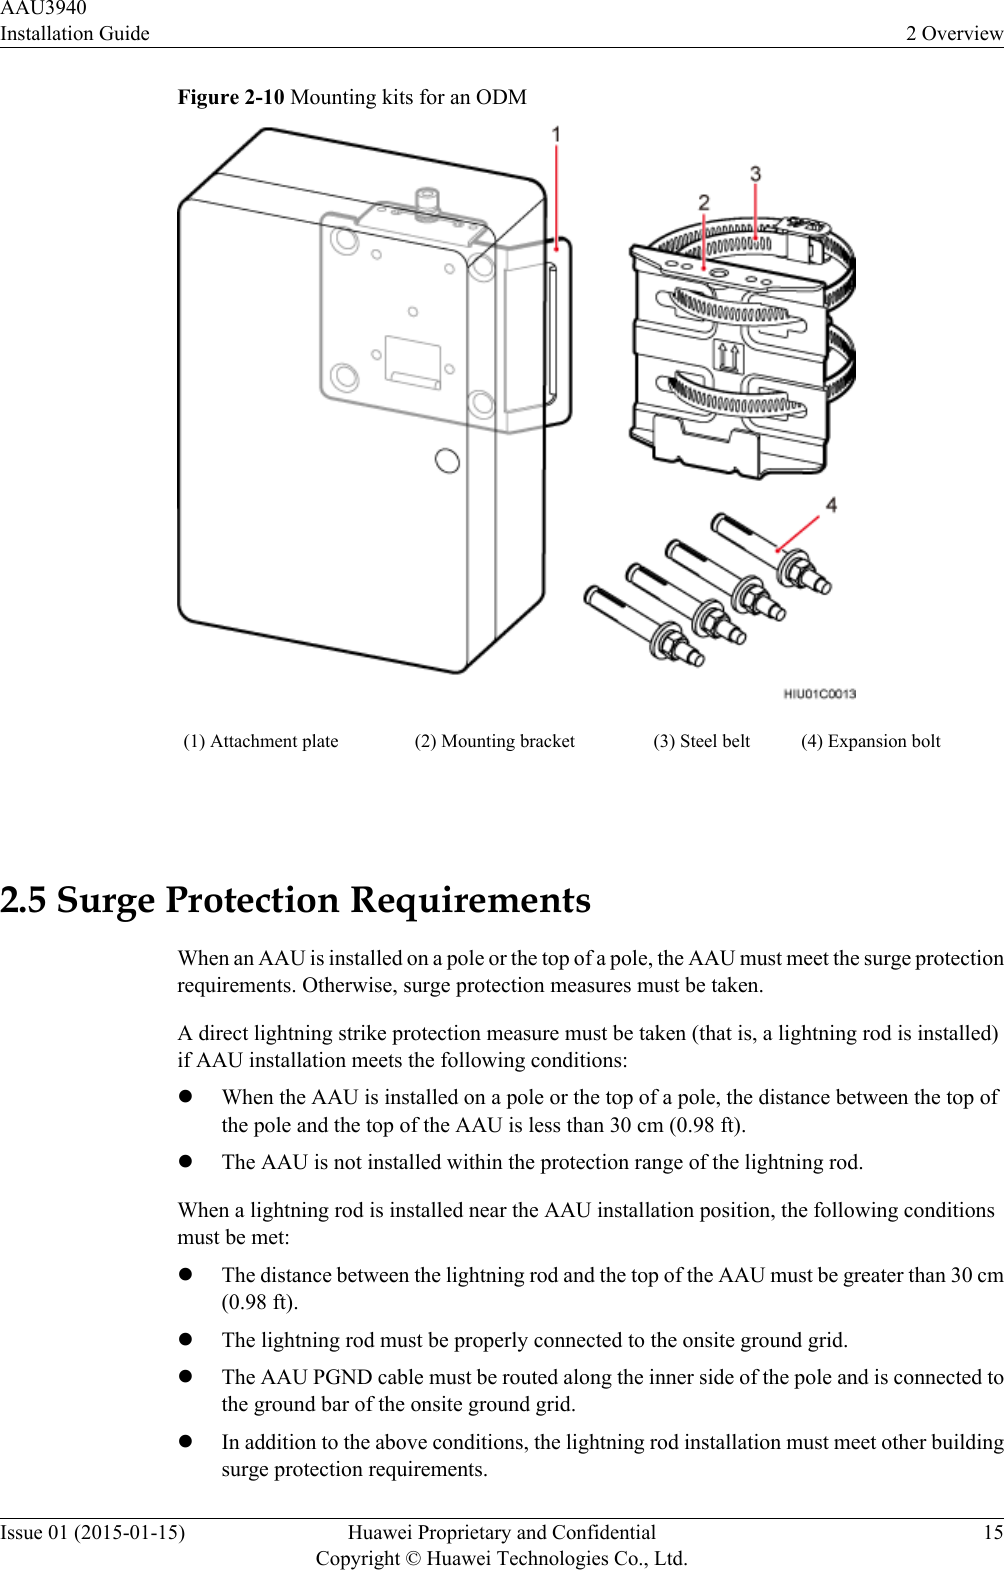 Figure 2-10 Mounting kits for an ODM(1) Attachment plate (2) Mounting bracket (3) Steel belt (4) Expansion bolt 2.5 Surge Protection RequirementsWhen an AAU is installed on a pole or the top of a pole, the AAU must meet the surge protectionrequirements. Otherwise, surge protection measures must be taken.A direct lightning strike protection measure must be taken (that is, a lightning rod is installed)if AAU installation meets the following conditions:lWhen the AAU is installed on a pole or the top of a pole, the distance between the top ofthe pole and the top of the AAU is less than 30 cm (0.98 ft).lThe AAU is not installed within the protection range of the lightning rod.When a lightning rod is installed near the AAU installation position, the following conditionsmust be met:lThe distance between the lightning rod and the top of the AAU must be greater than 30 cm(0.98 ft).lThe lightning rod must be properly connected to the onsite ground grid.lThe AAU PGND cable must be routed along the inner side of the pole and is connected tothe ground bar of the onsite ground grid.lIn addition to the above conditions, the lightning rod installation must meet other buildingsurge protection requirements.AAU3940Installation Guide 2 OverviewIssue 01 (2015-01-15) Huawei Proprietary and ConfidentialCopyright © Huawei Technologies Co., Ltd.15